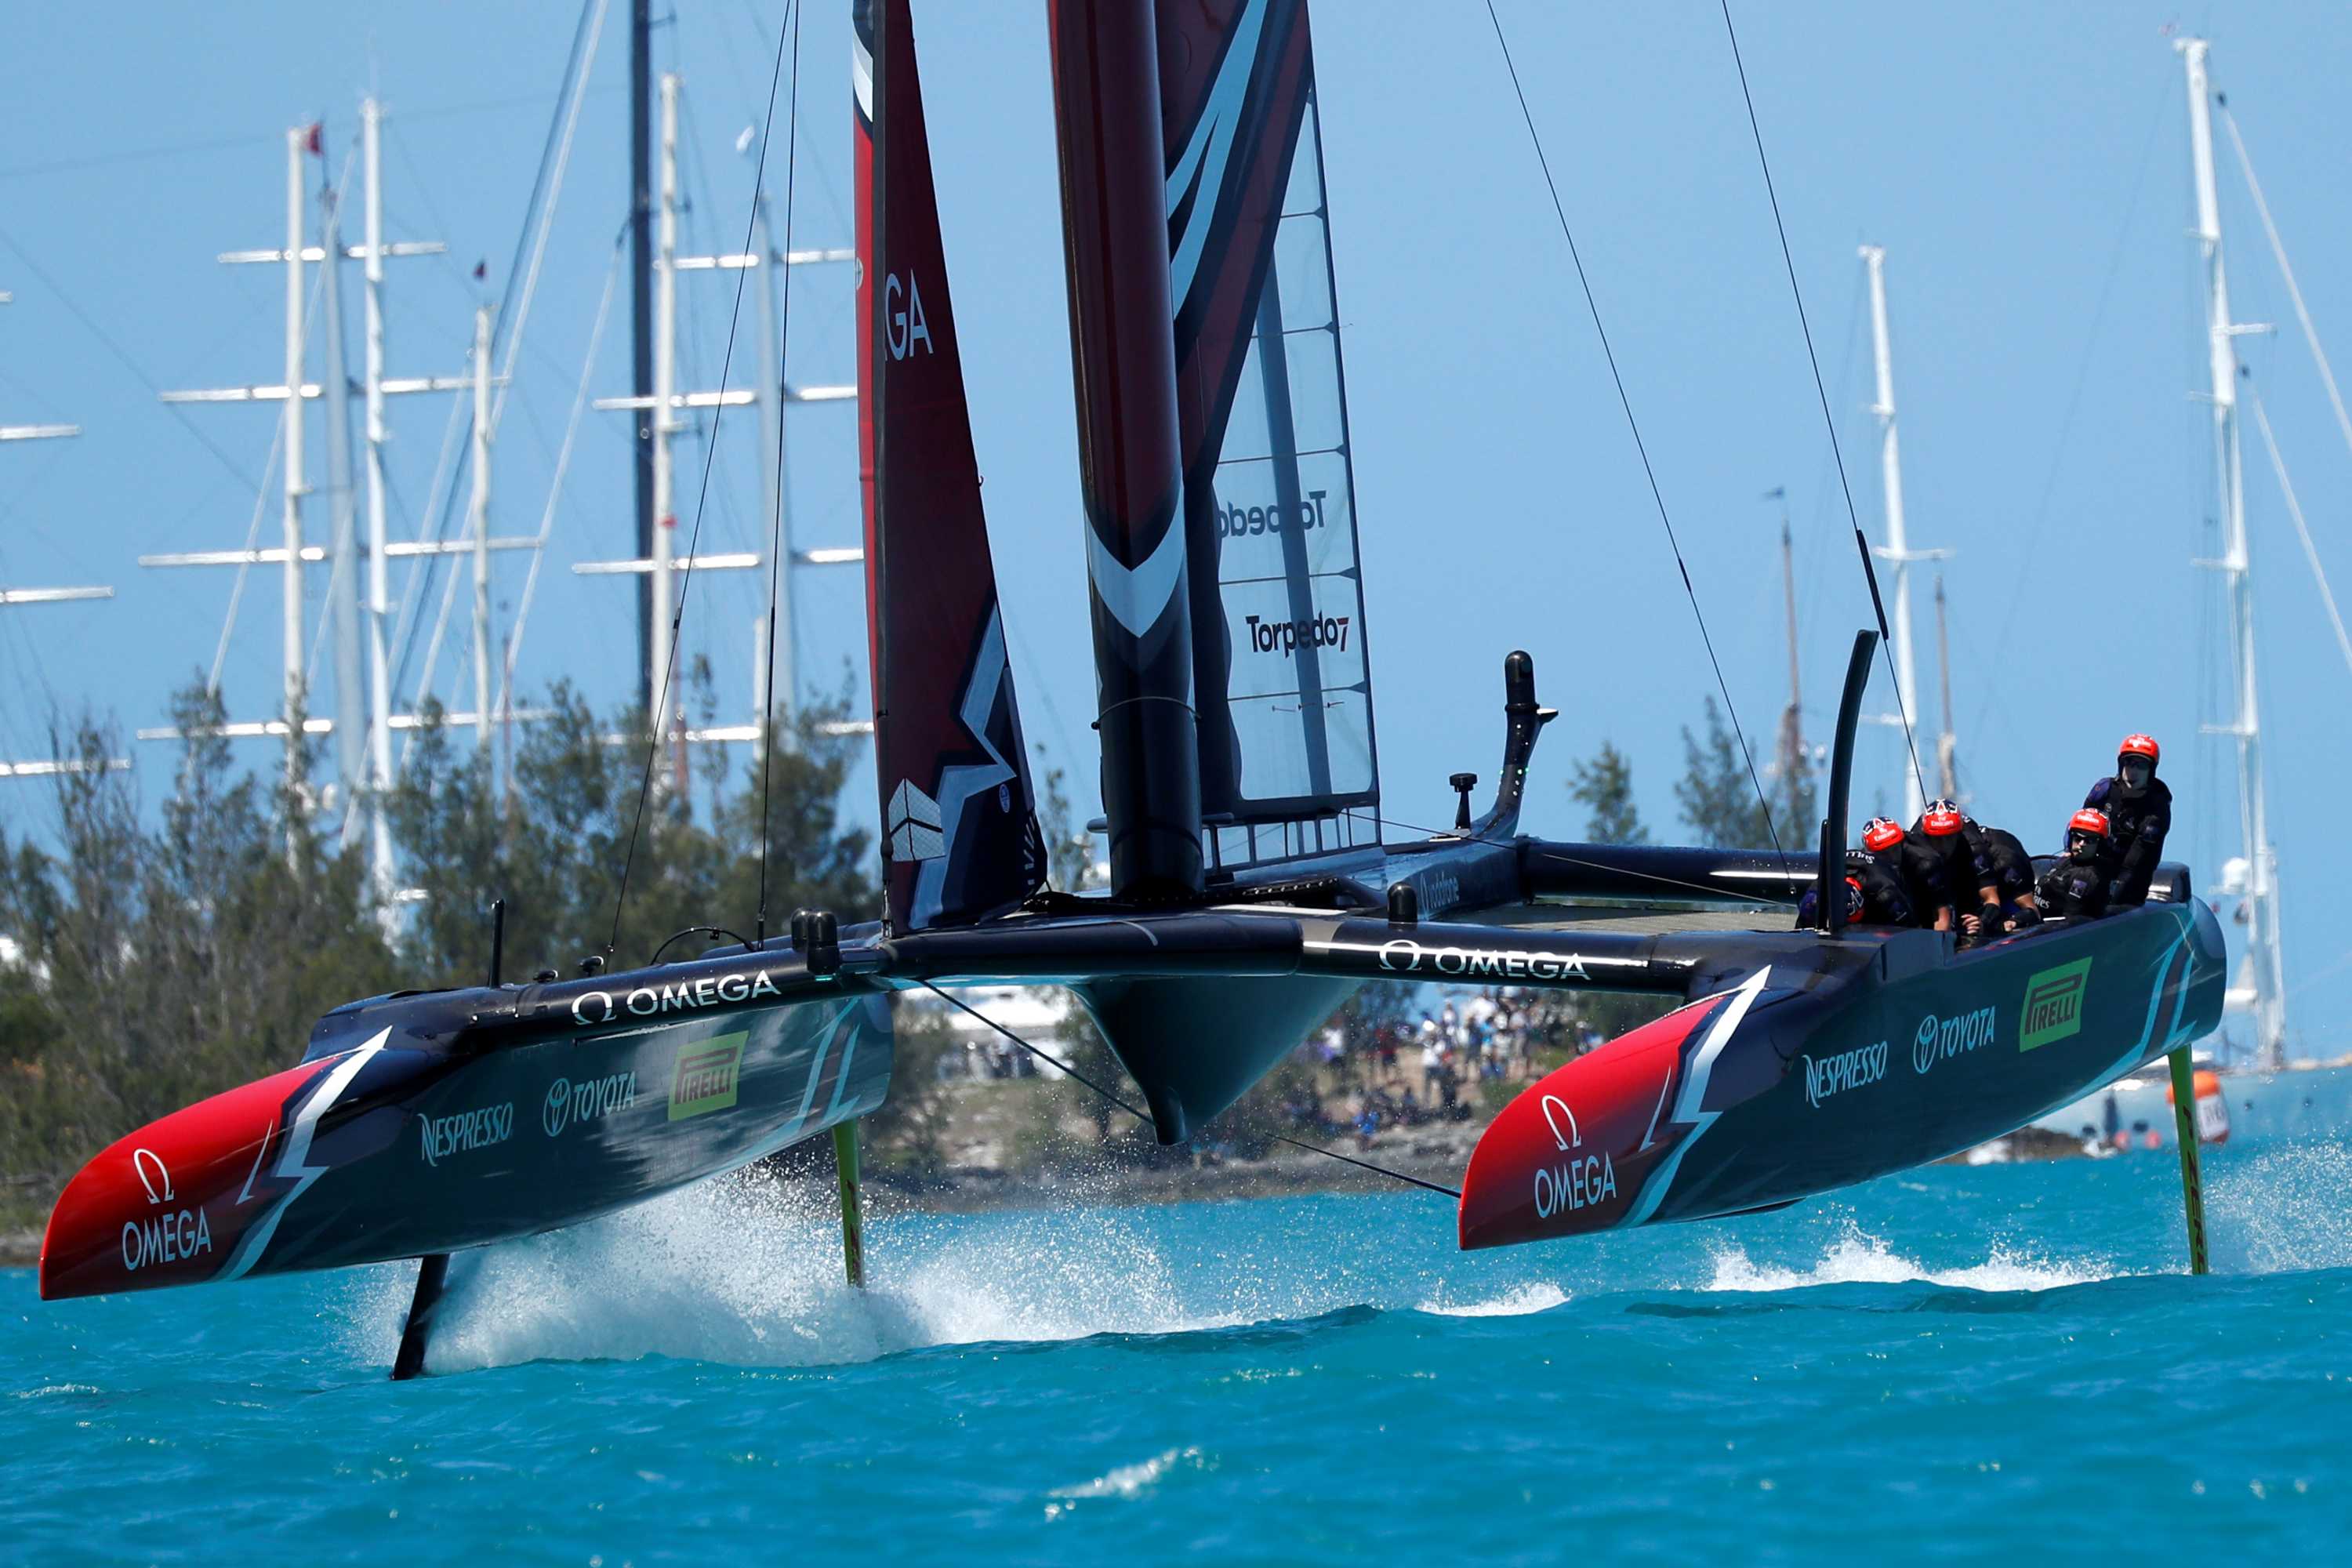 Hulls of the Modern America's Cup